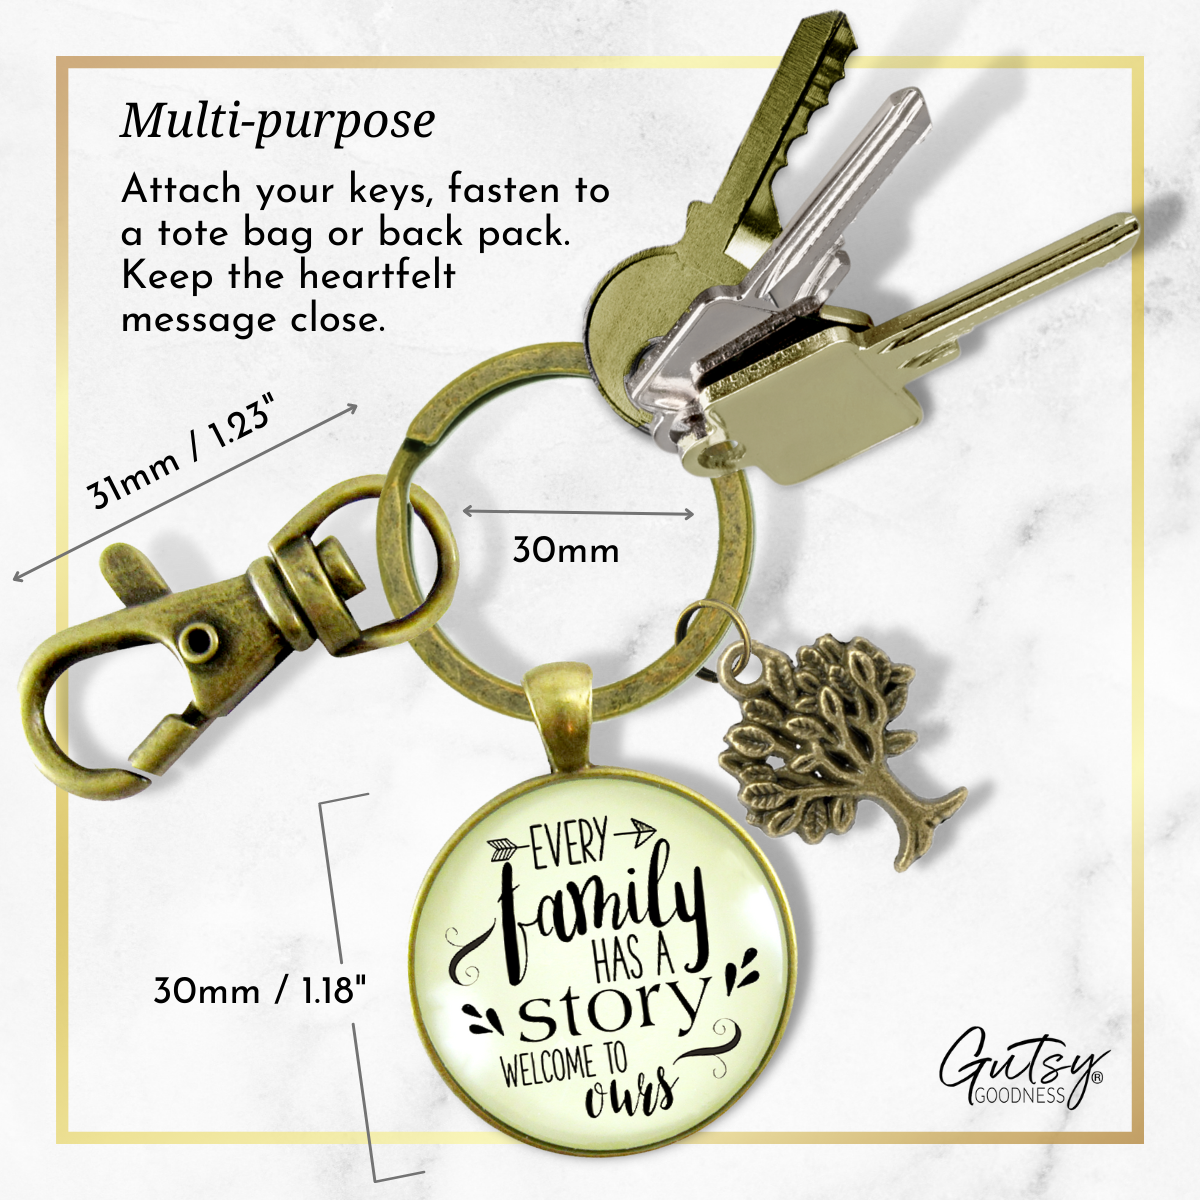 Every Family Has A Story Welcome Keychain Gift In Law Step Bonus Child Adoption - Gutsy Goodness Handmade Jewelry;Every Family Has A Story Welcome Keychain Gift In Law Step Bonus Child Adoption - Gutsy Goodness Handmade Jewelry Gifts